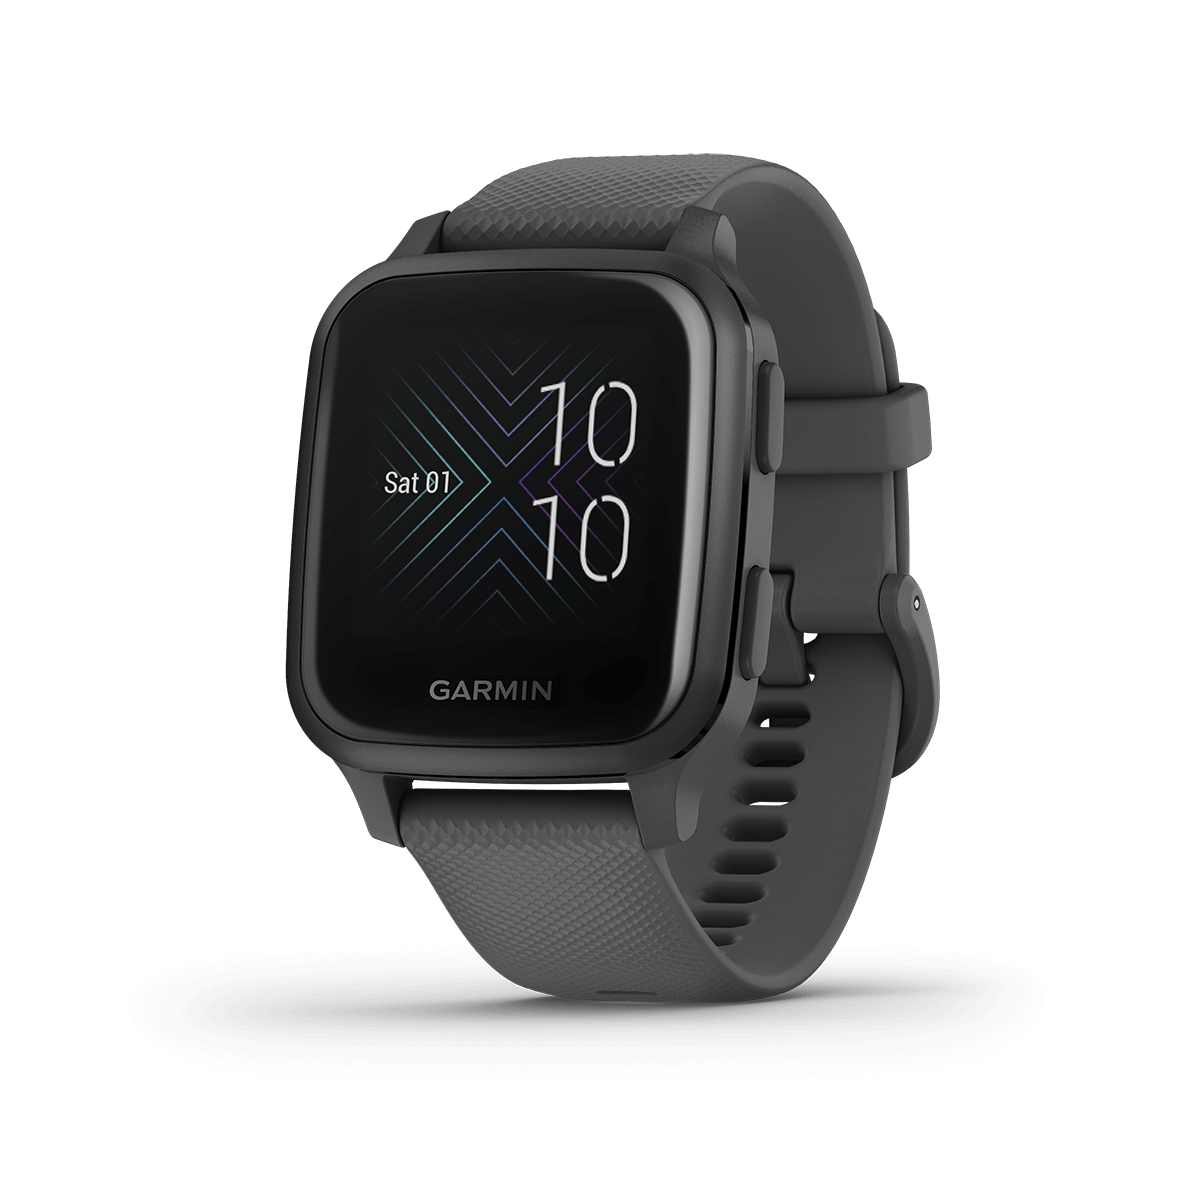 Garmin Garmin Venu Square, GPS Smartwatch with Bright Touchscreen Display, Features Music and Up to 6 Days of Battery Life, Slate Carbon-Fiber Venu, (Shadow Grey/Slate)